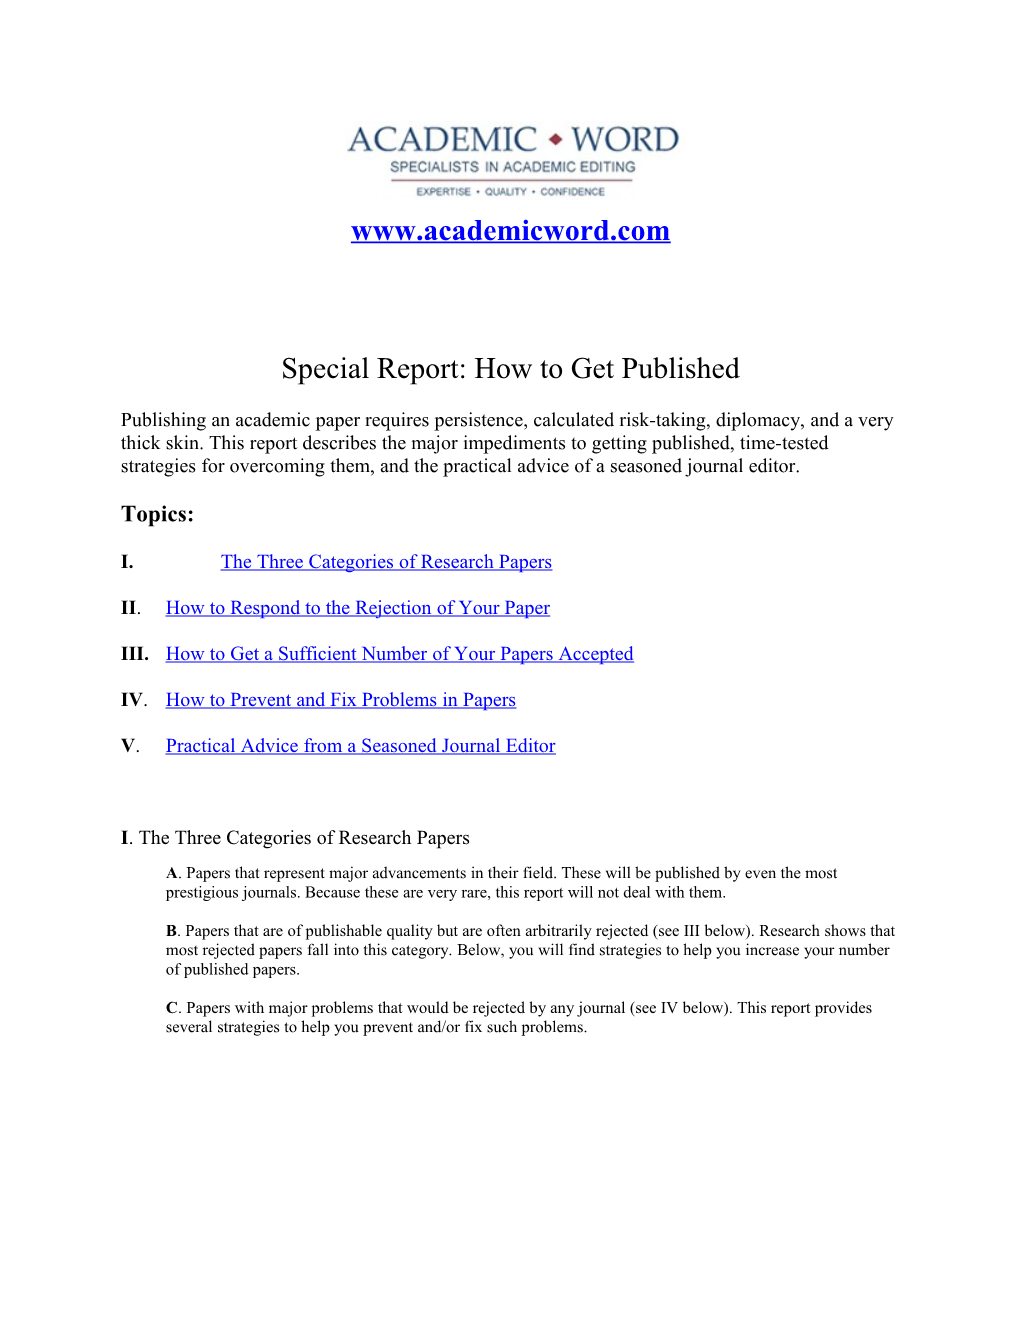 Special Report: How to Get Published